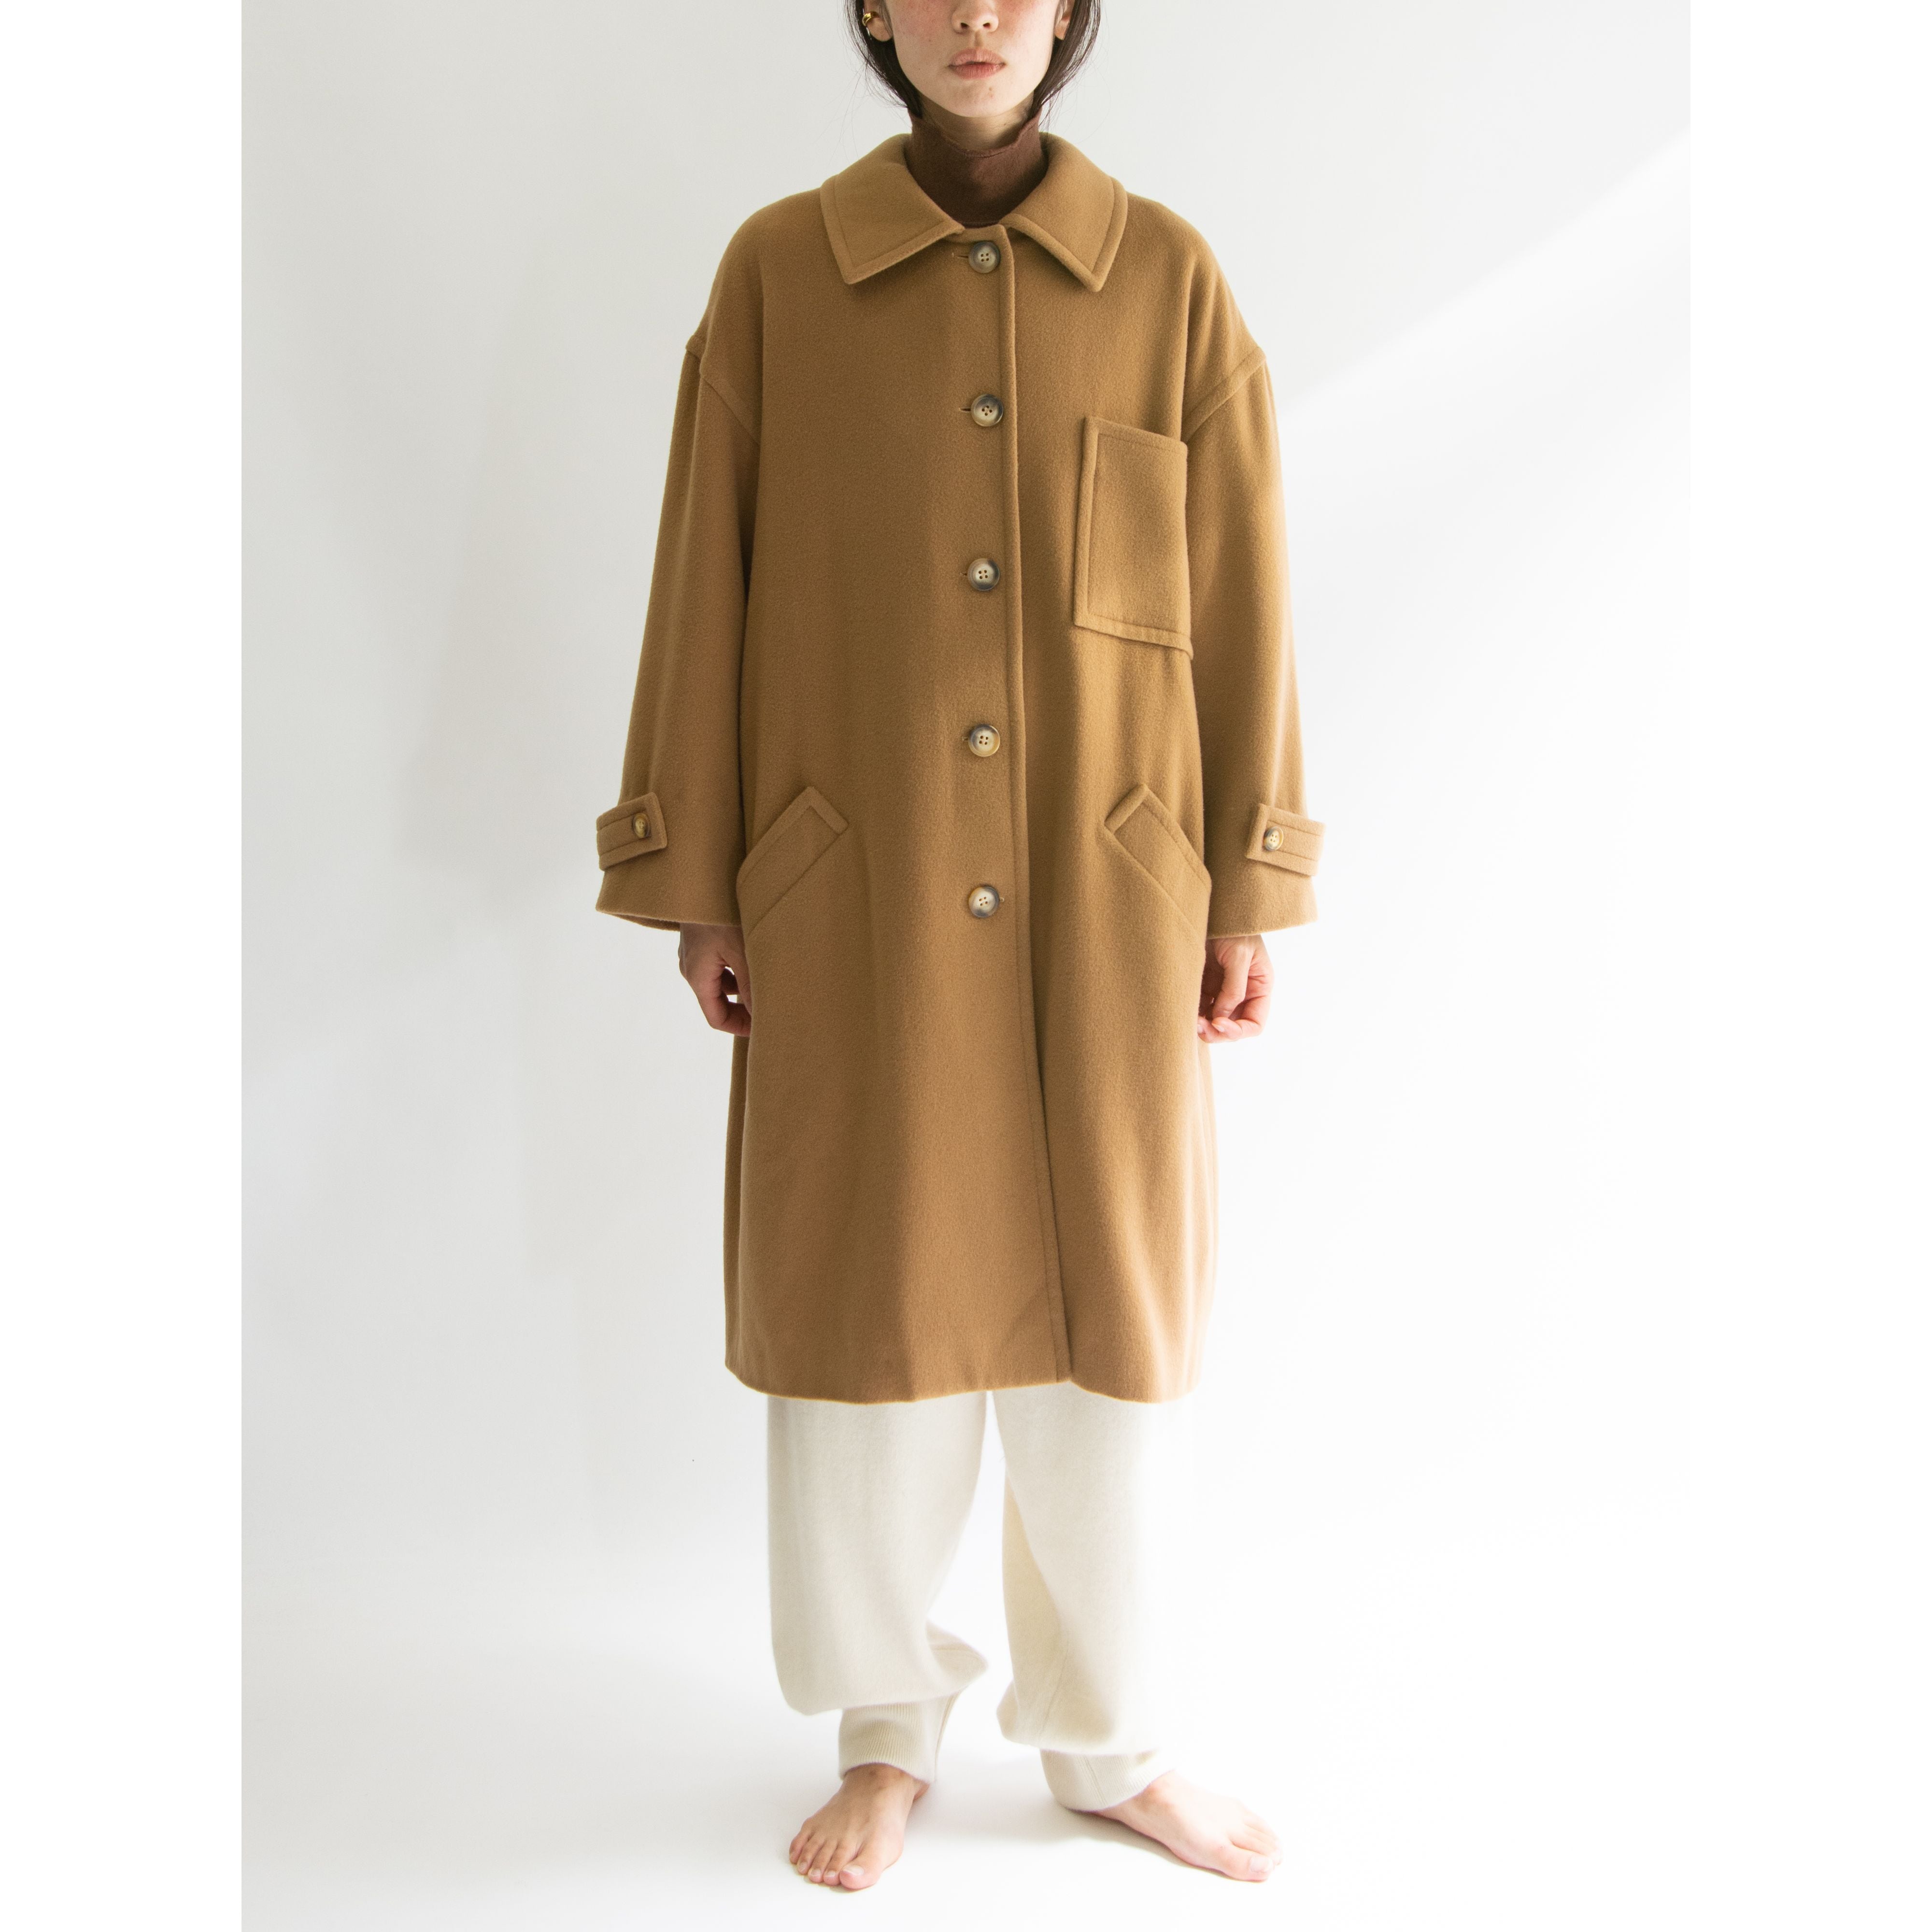 HANAE MORI PARIS】Made in France 80-90's Cashmere-Wool Oversized 